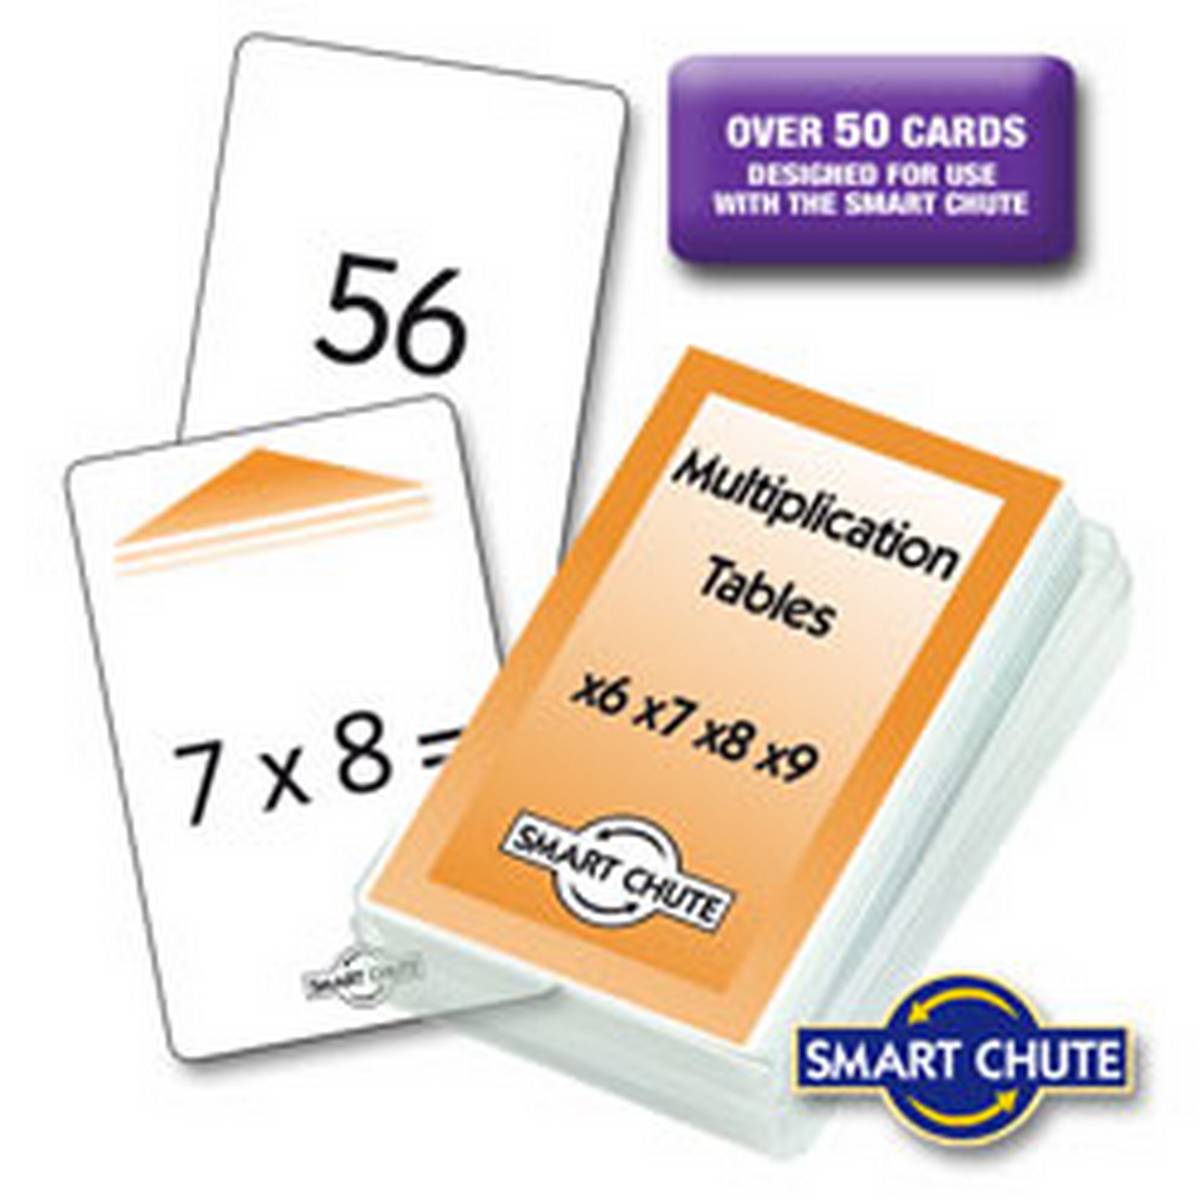 Multiplication Facts Chute Cards - x6 - x9